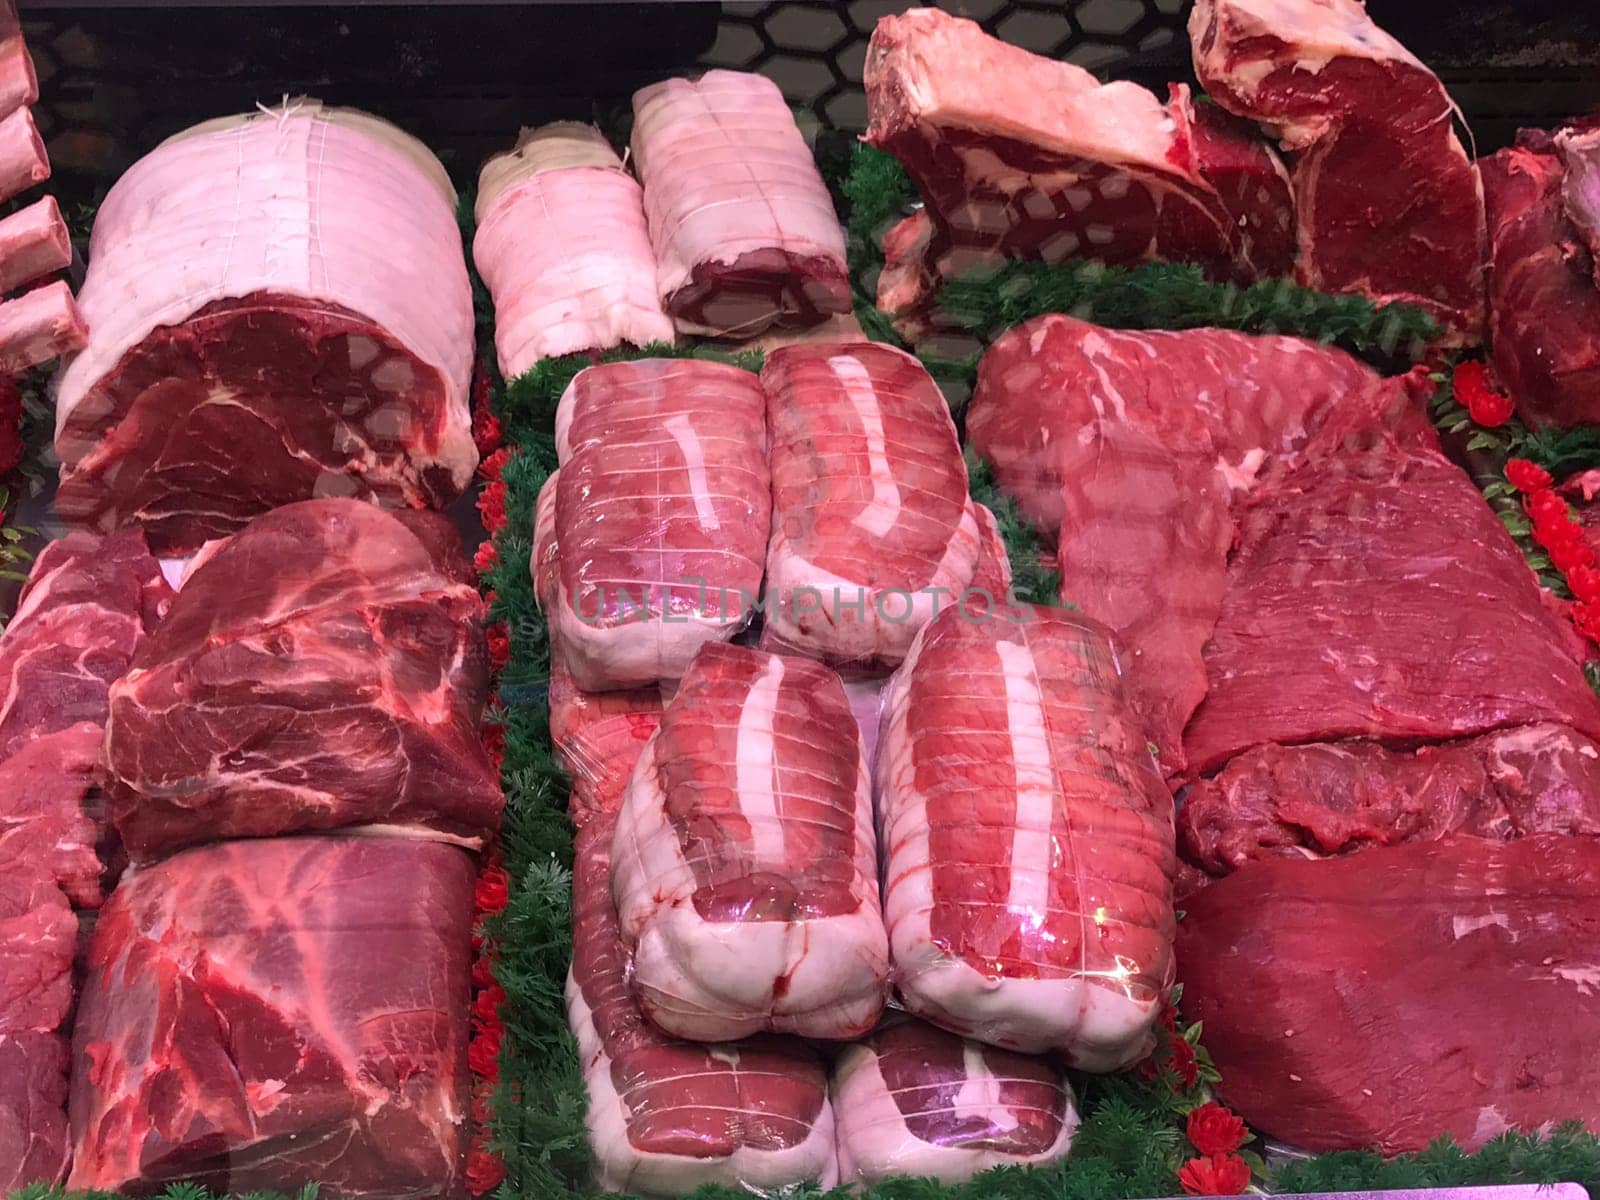 Showcase with raw meat in butcher shop, Supermarket, High quality photo